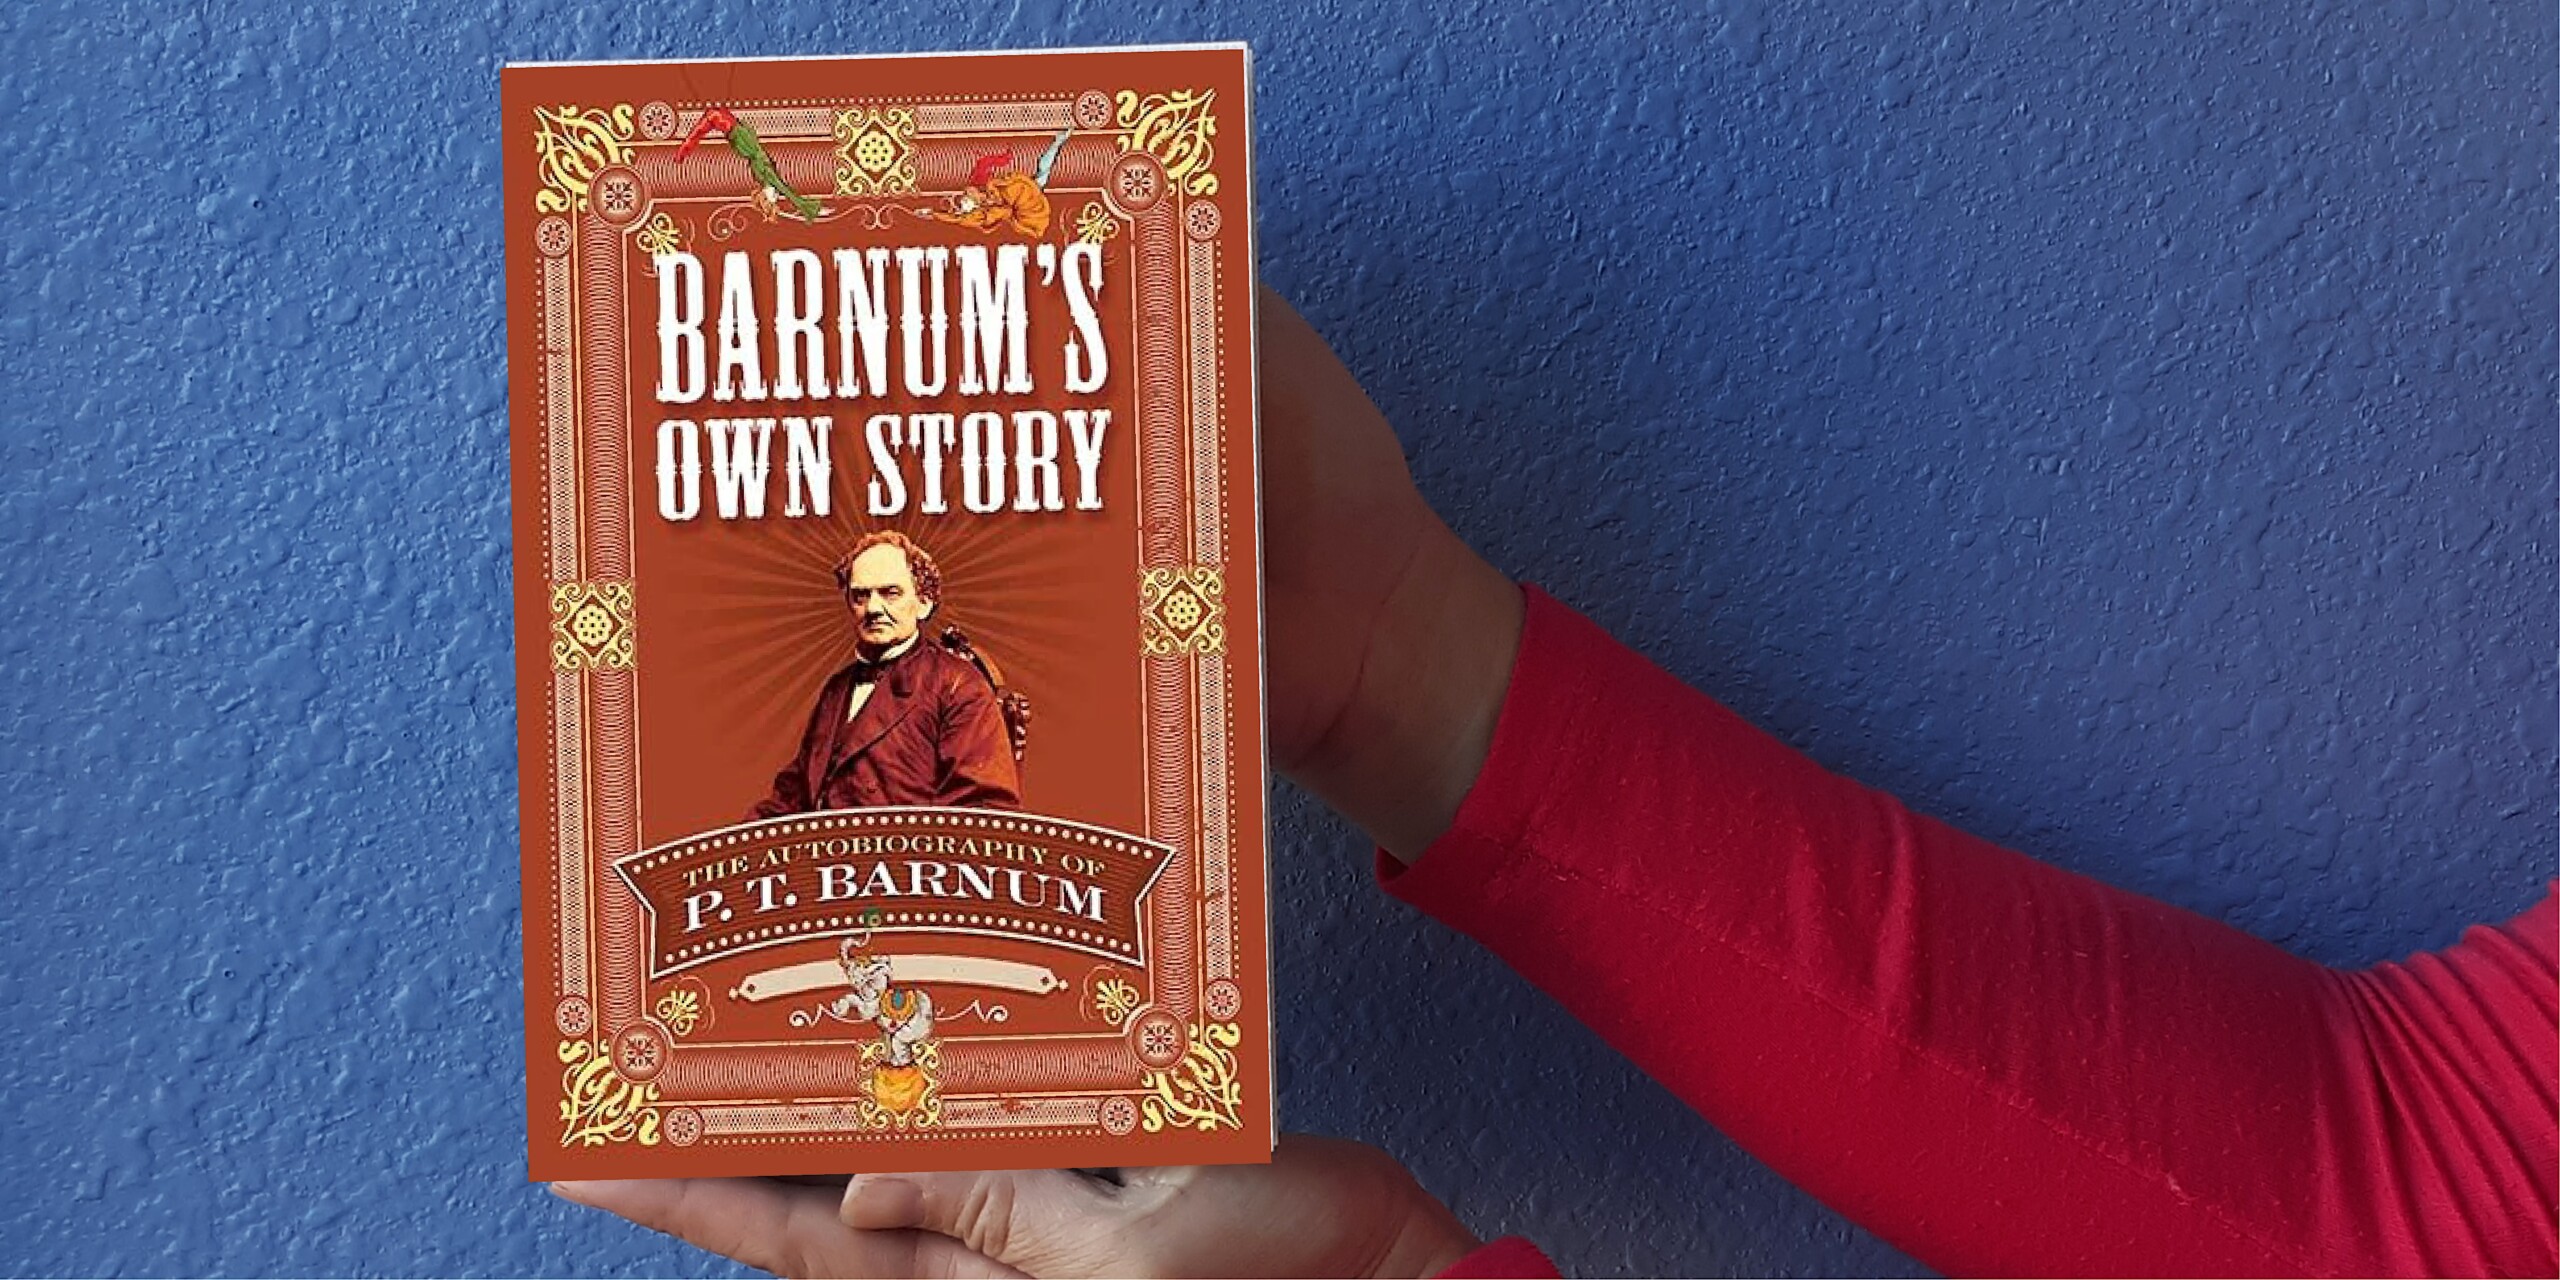 What’s Next? Book Club: The Autobiography of PT Barnum November 29th